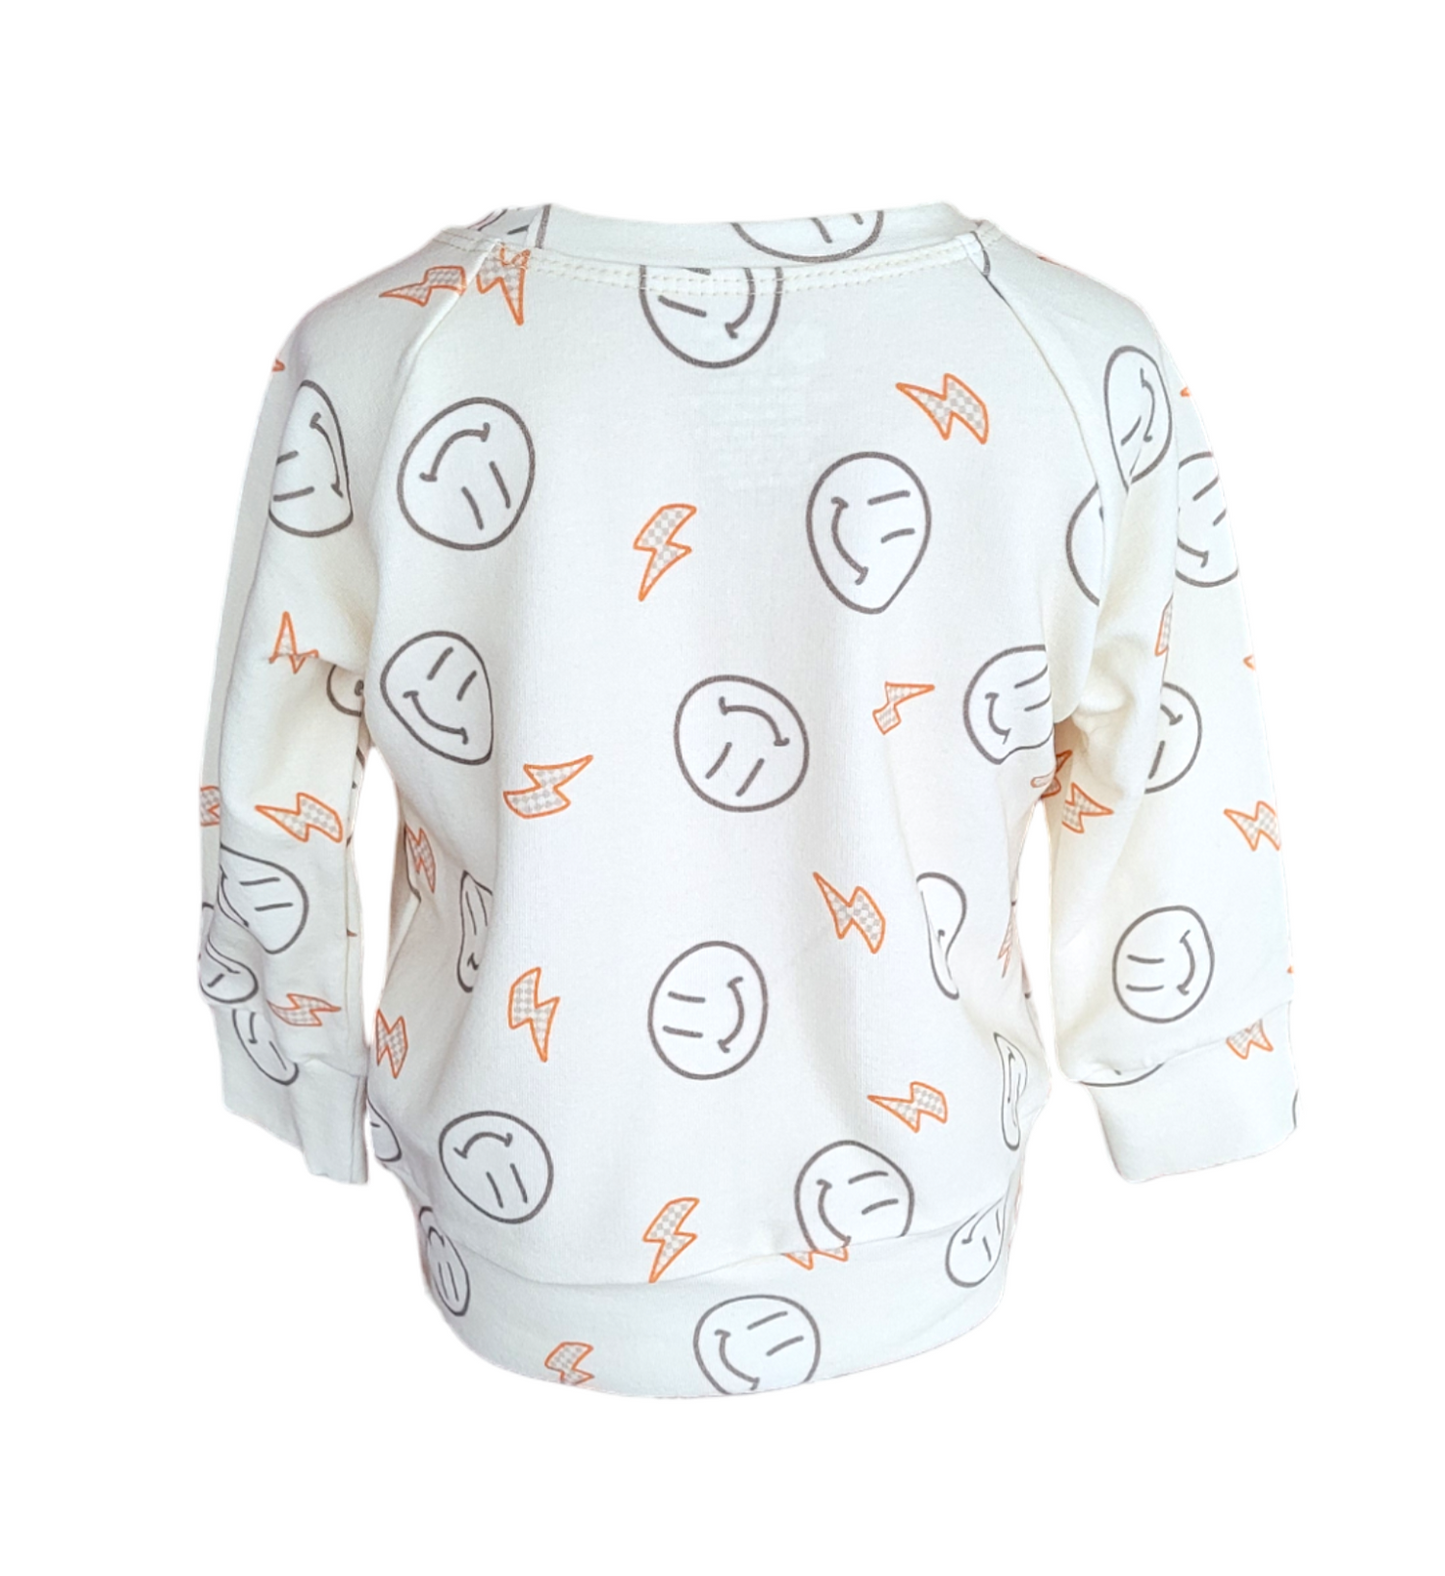 Back of Smiley Sweatshirt. Organic Cream sweatshirt with orange lightening bolts and outlined smiley faces.